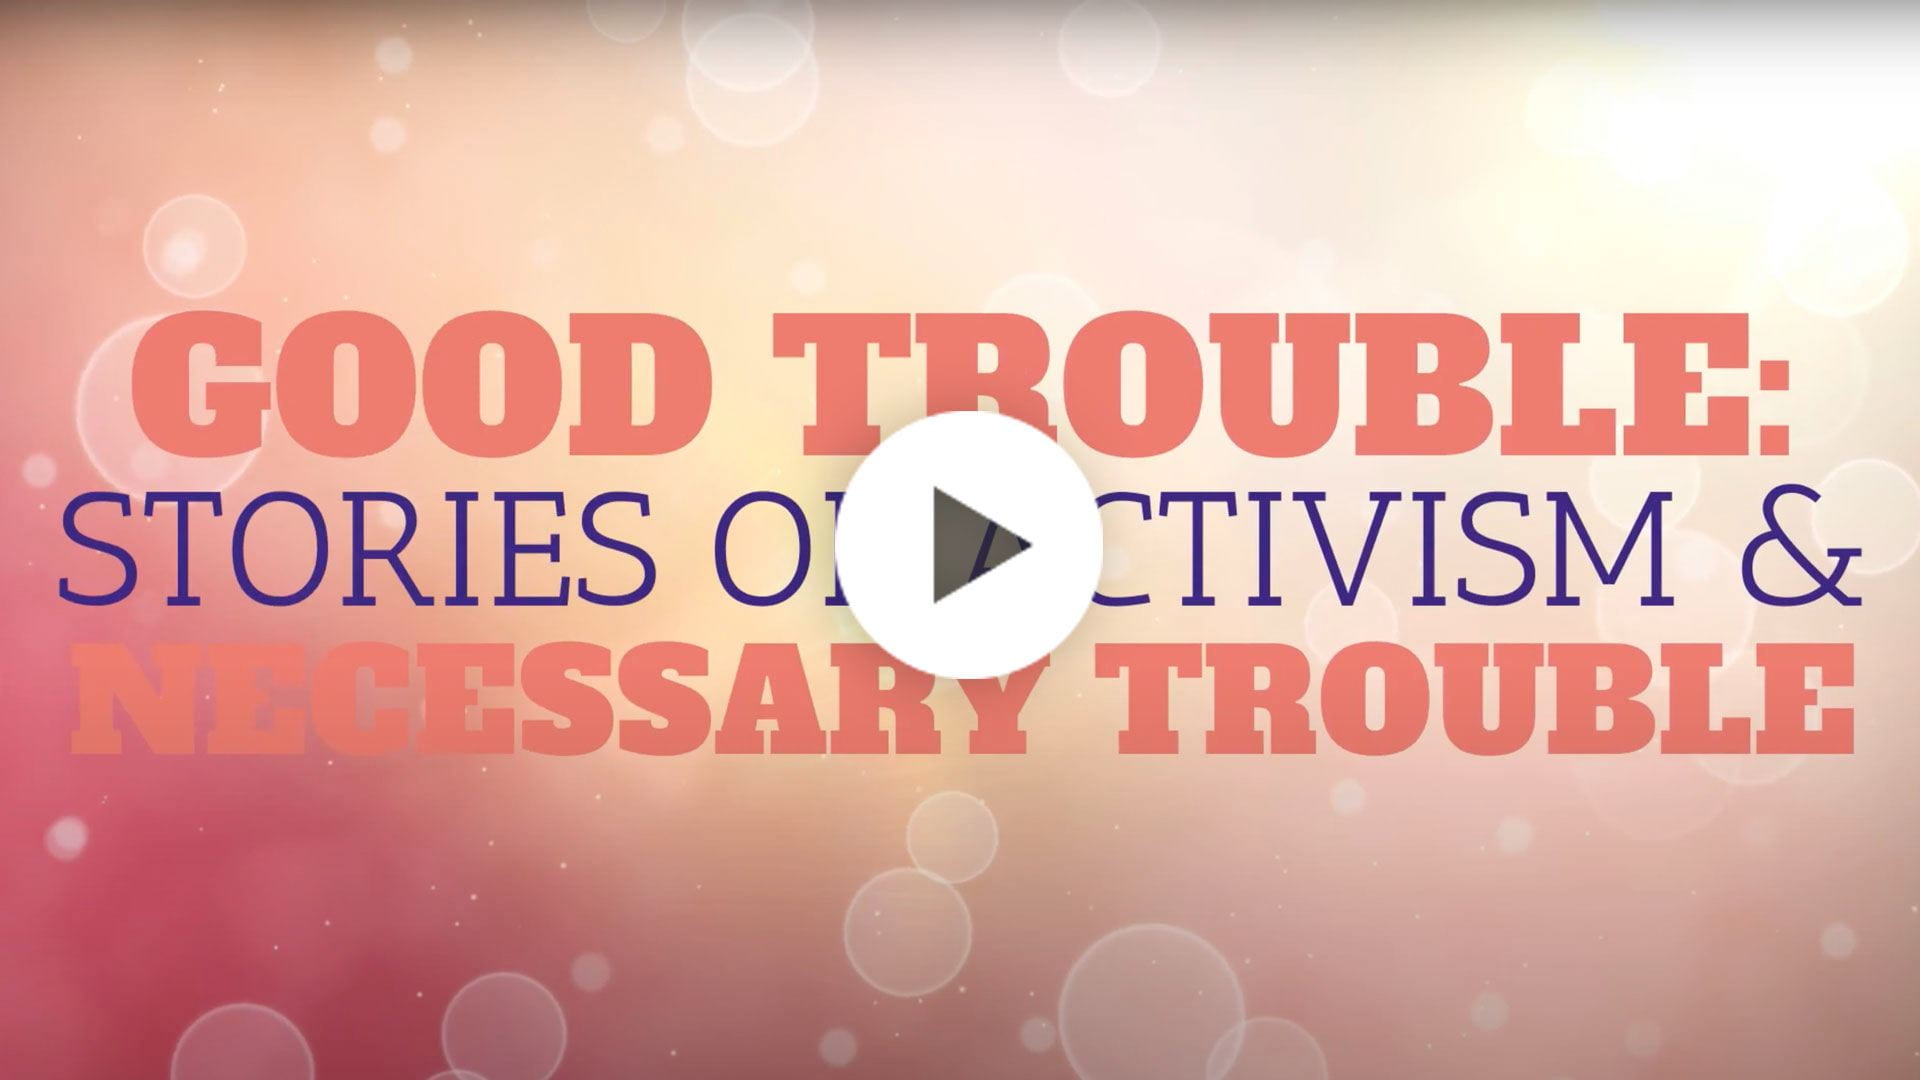 Good Trouble: Stories of Activism & Necessary Trouble.